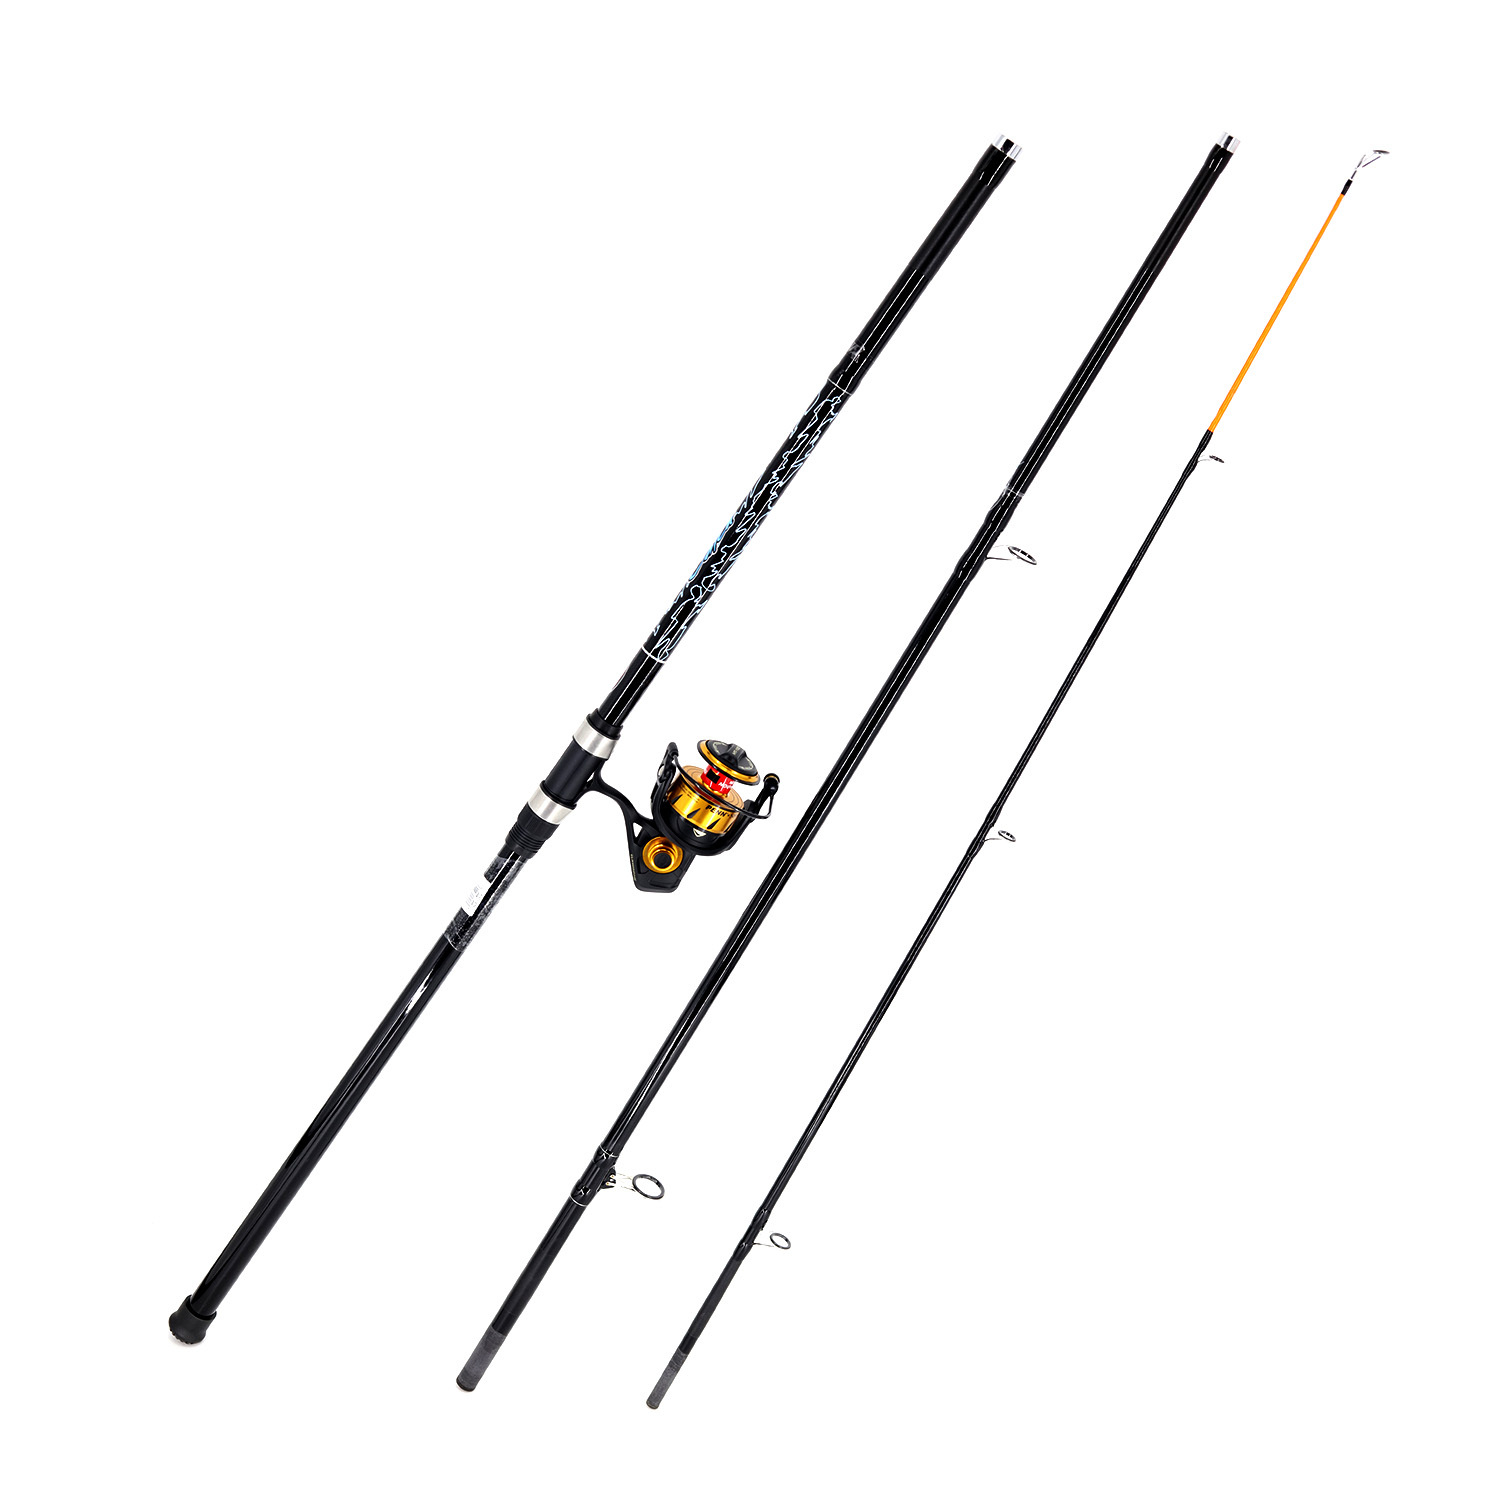 Shore Fishing (Mitchell 4.2m and Penn VI 7500 and snap swivels) Combo